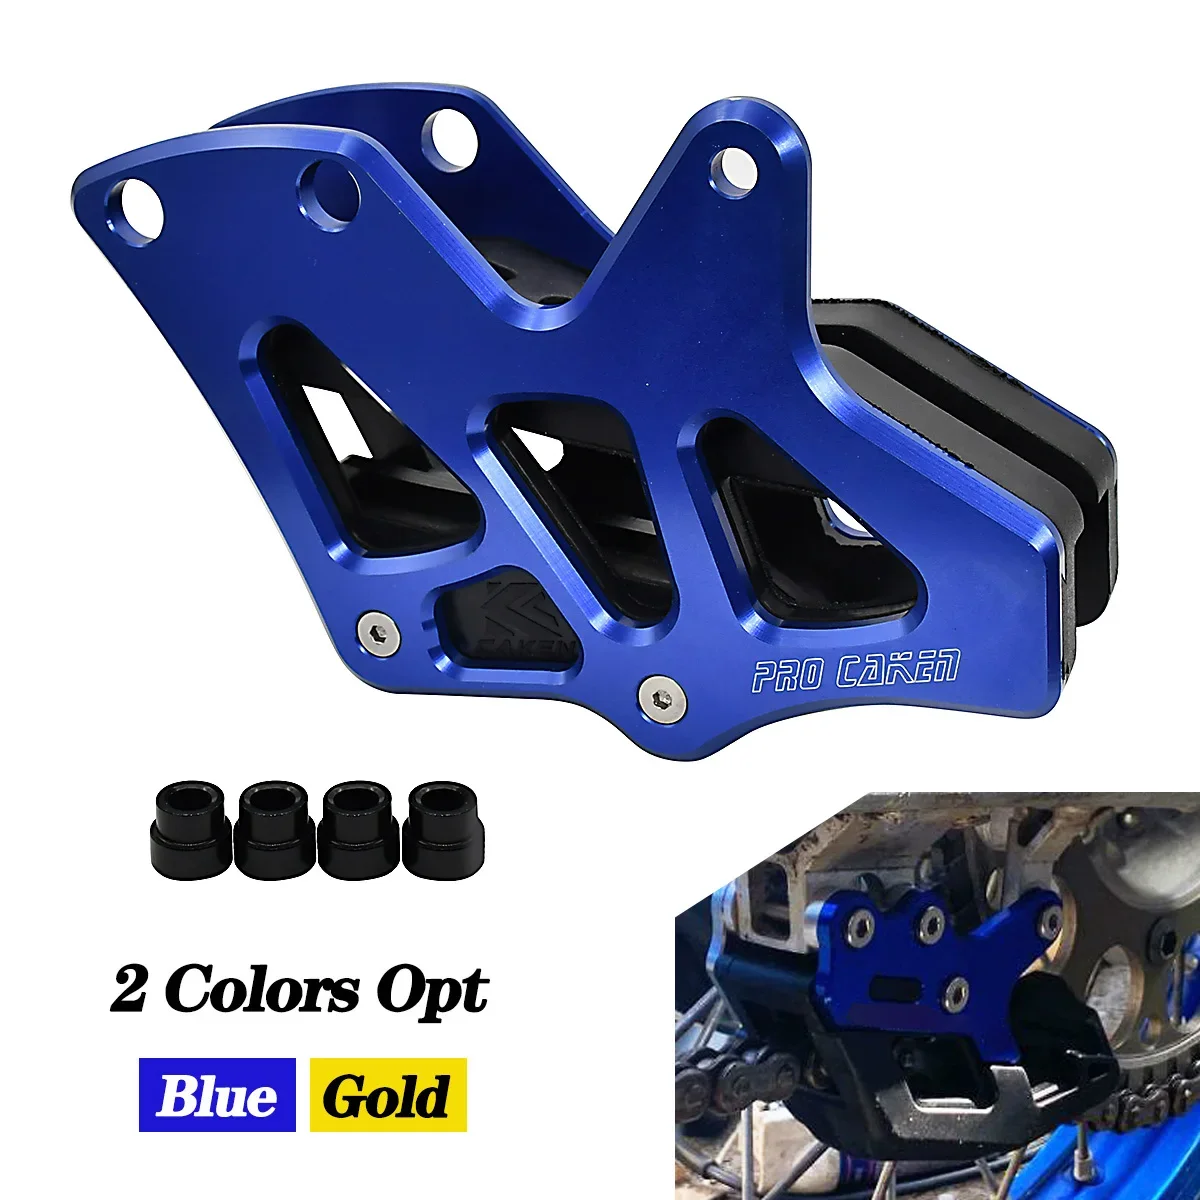 

Motorcycle CNC Chain Guard Guide For YAMAHA YZ125 YZ250 YZ250F YZ400F YZ426F YZ450F WR250F WR400F WR426F WR450F YZ WR 250F 450F